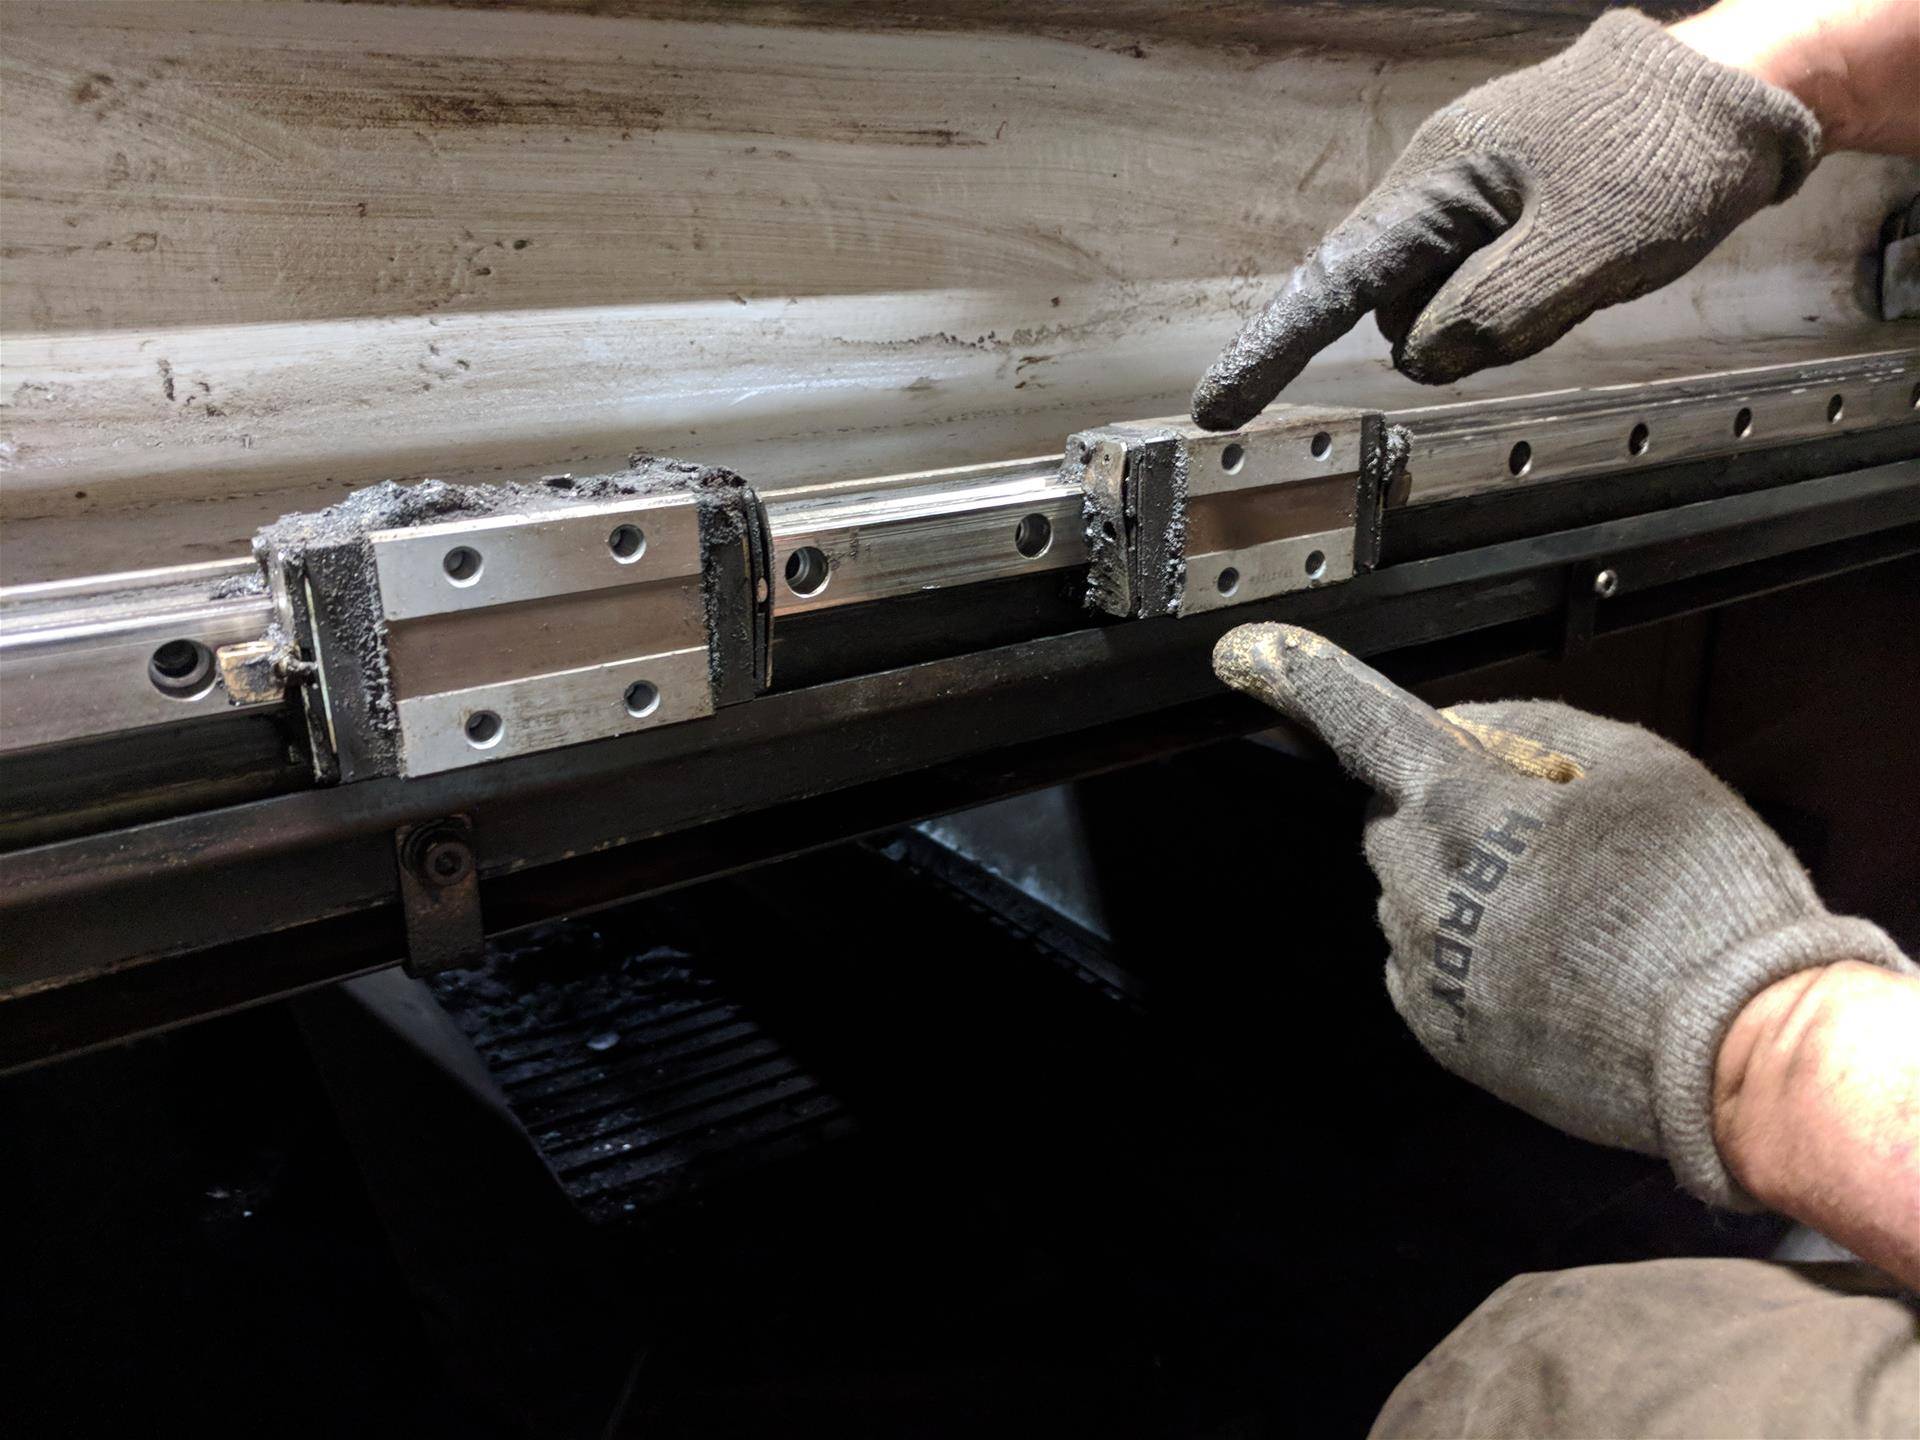 MAZAK Y-Axis Linear Way Guide Rail Removal